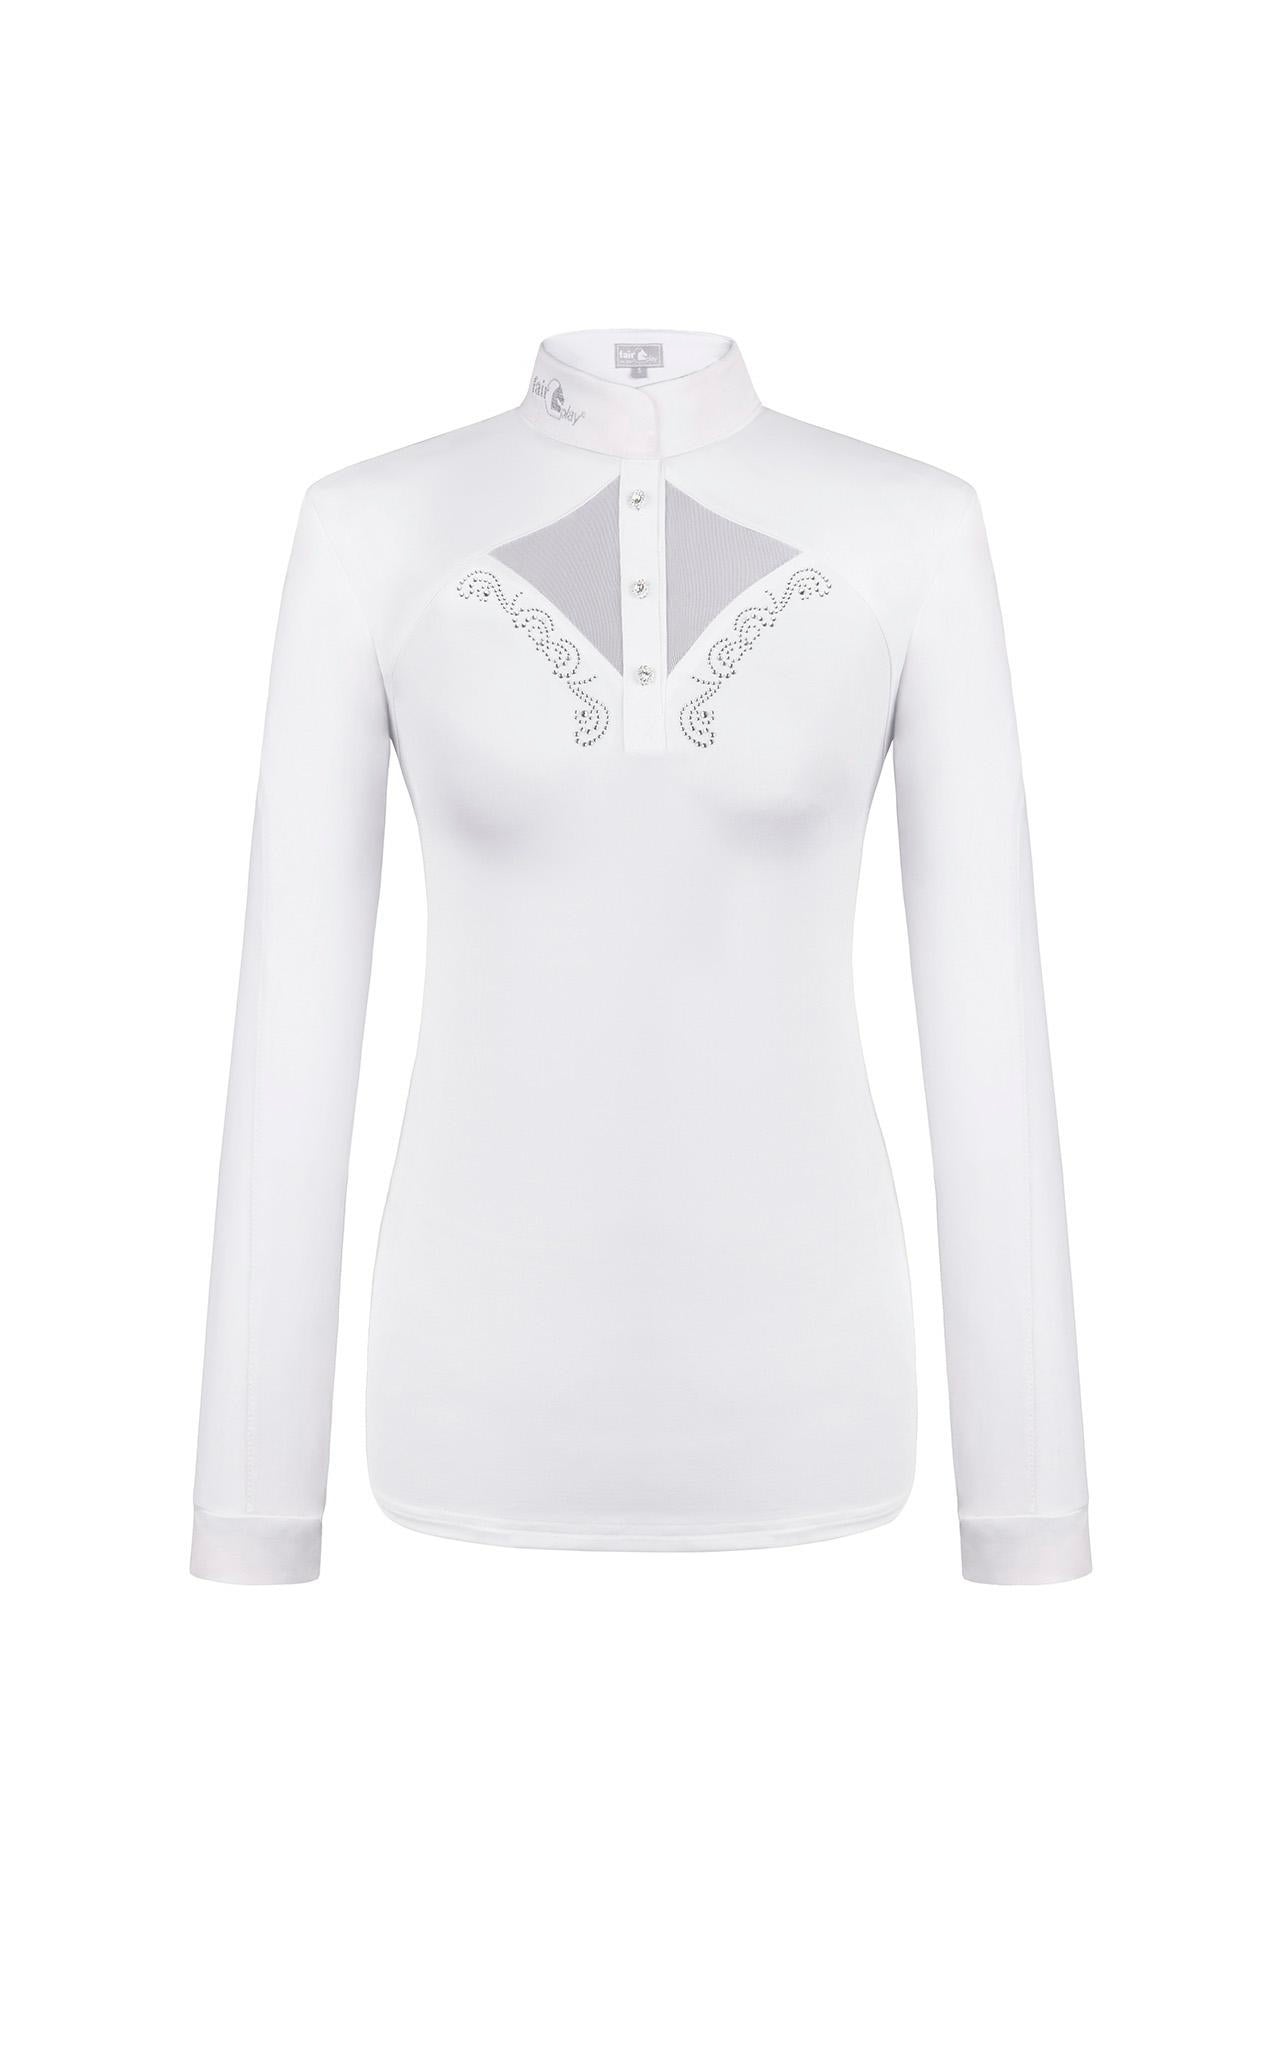 White competition shirt for equestrian women